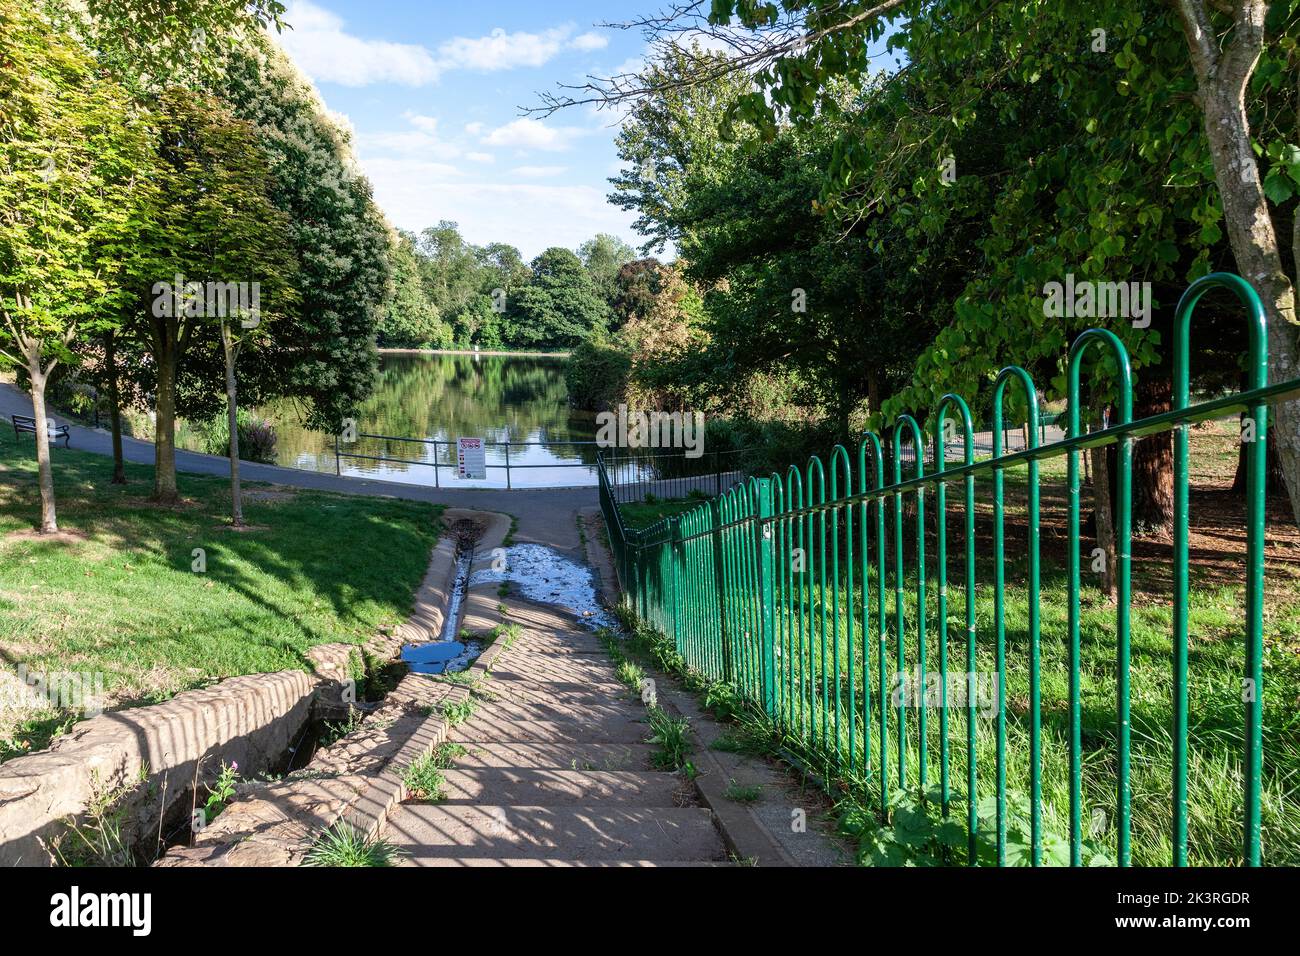 Water overflow from a boating lake into the main lake in Abington Park, Northampton, England, UK. Stock Photo